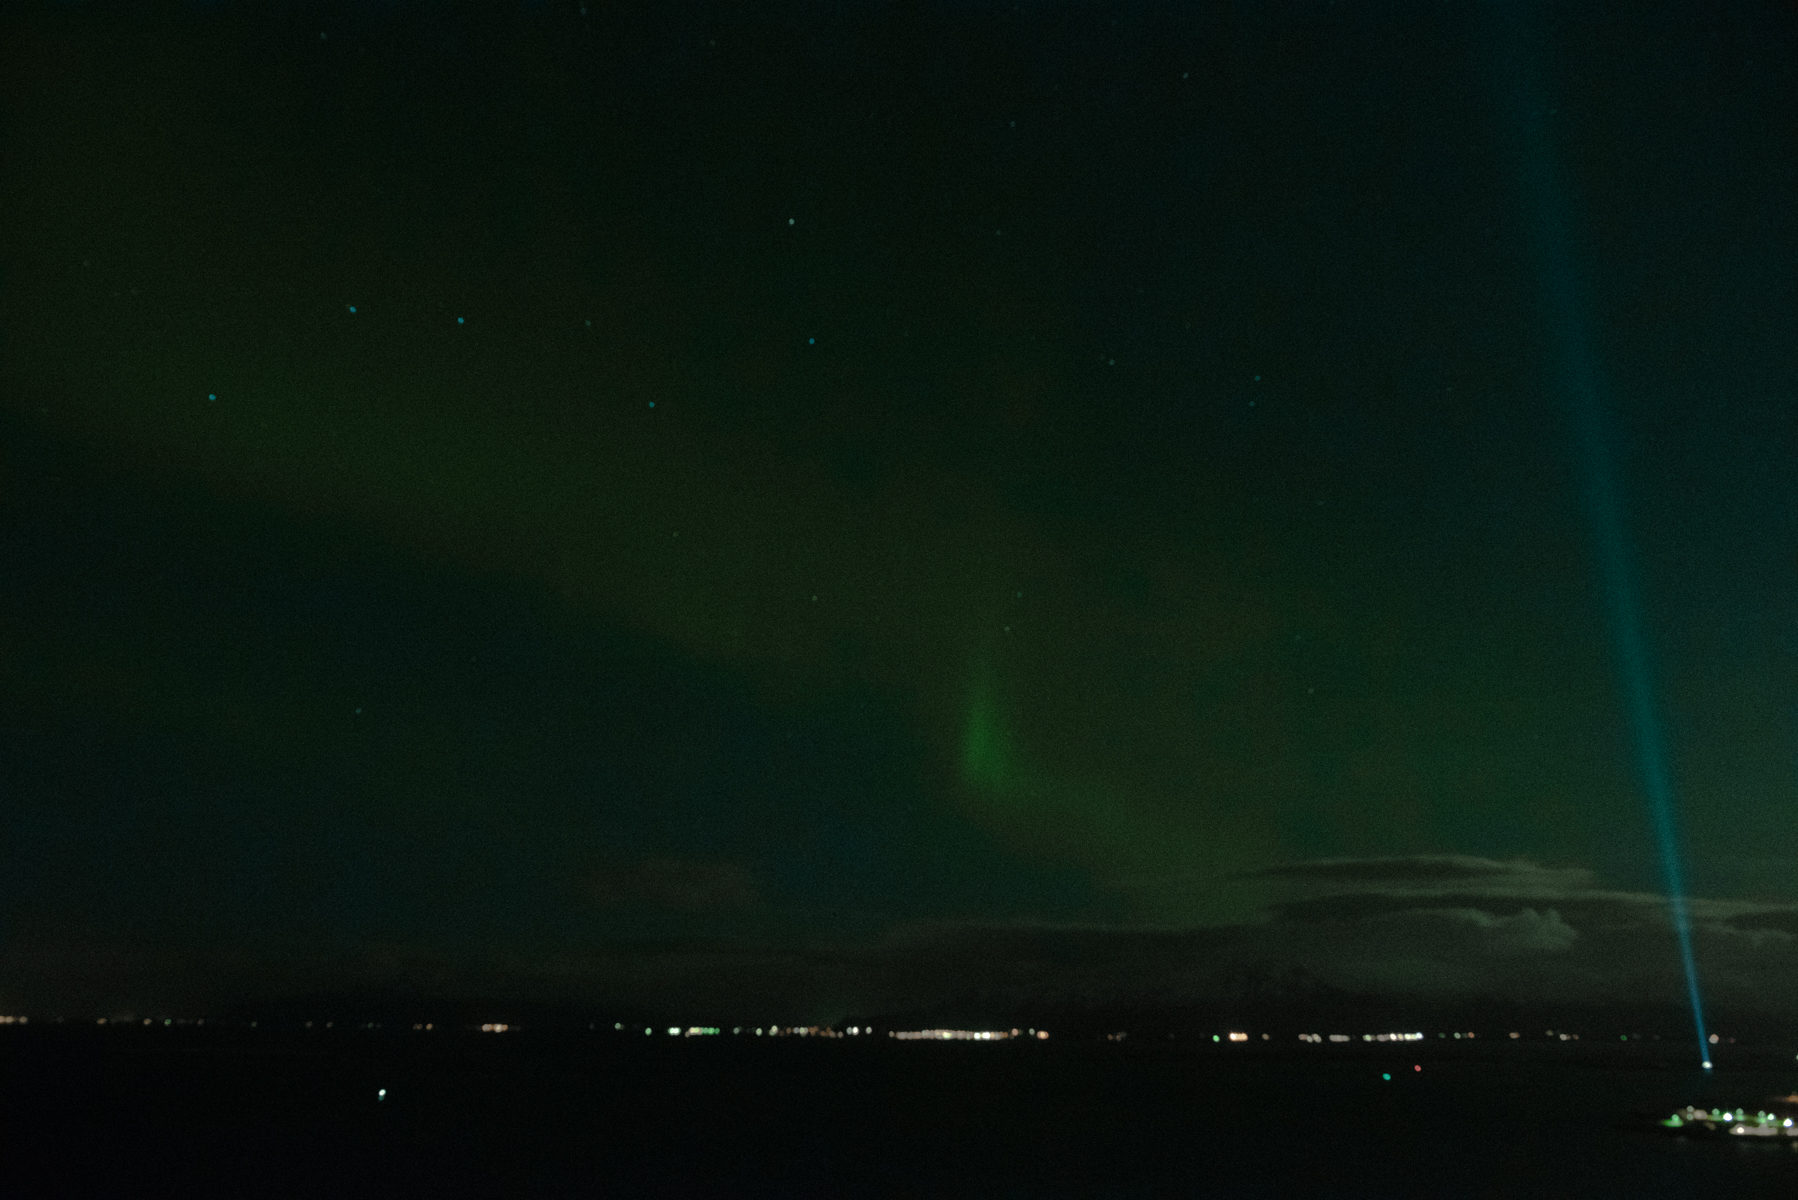 Torrance Coombs and Alyssa Campanella of The A List blog view the Northern Lights at Tower Suites Reykjavik in Iceland